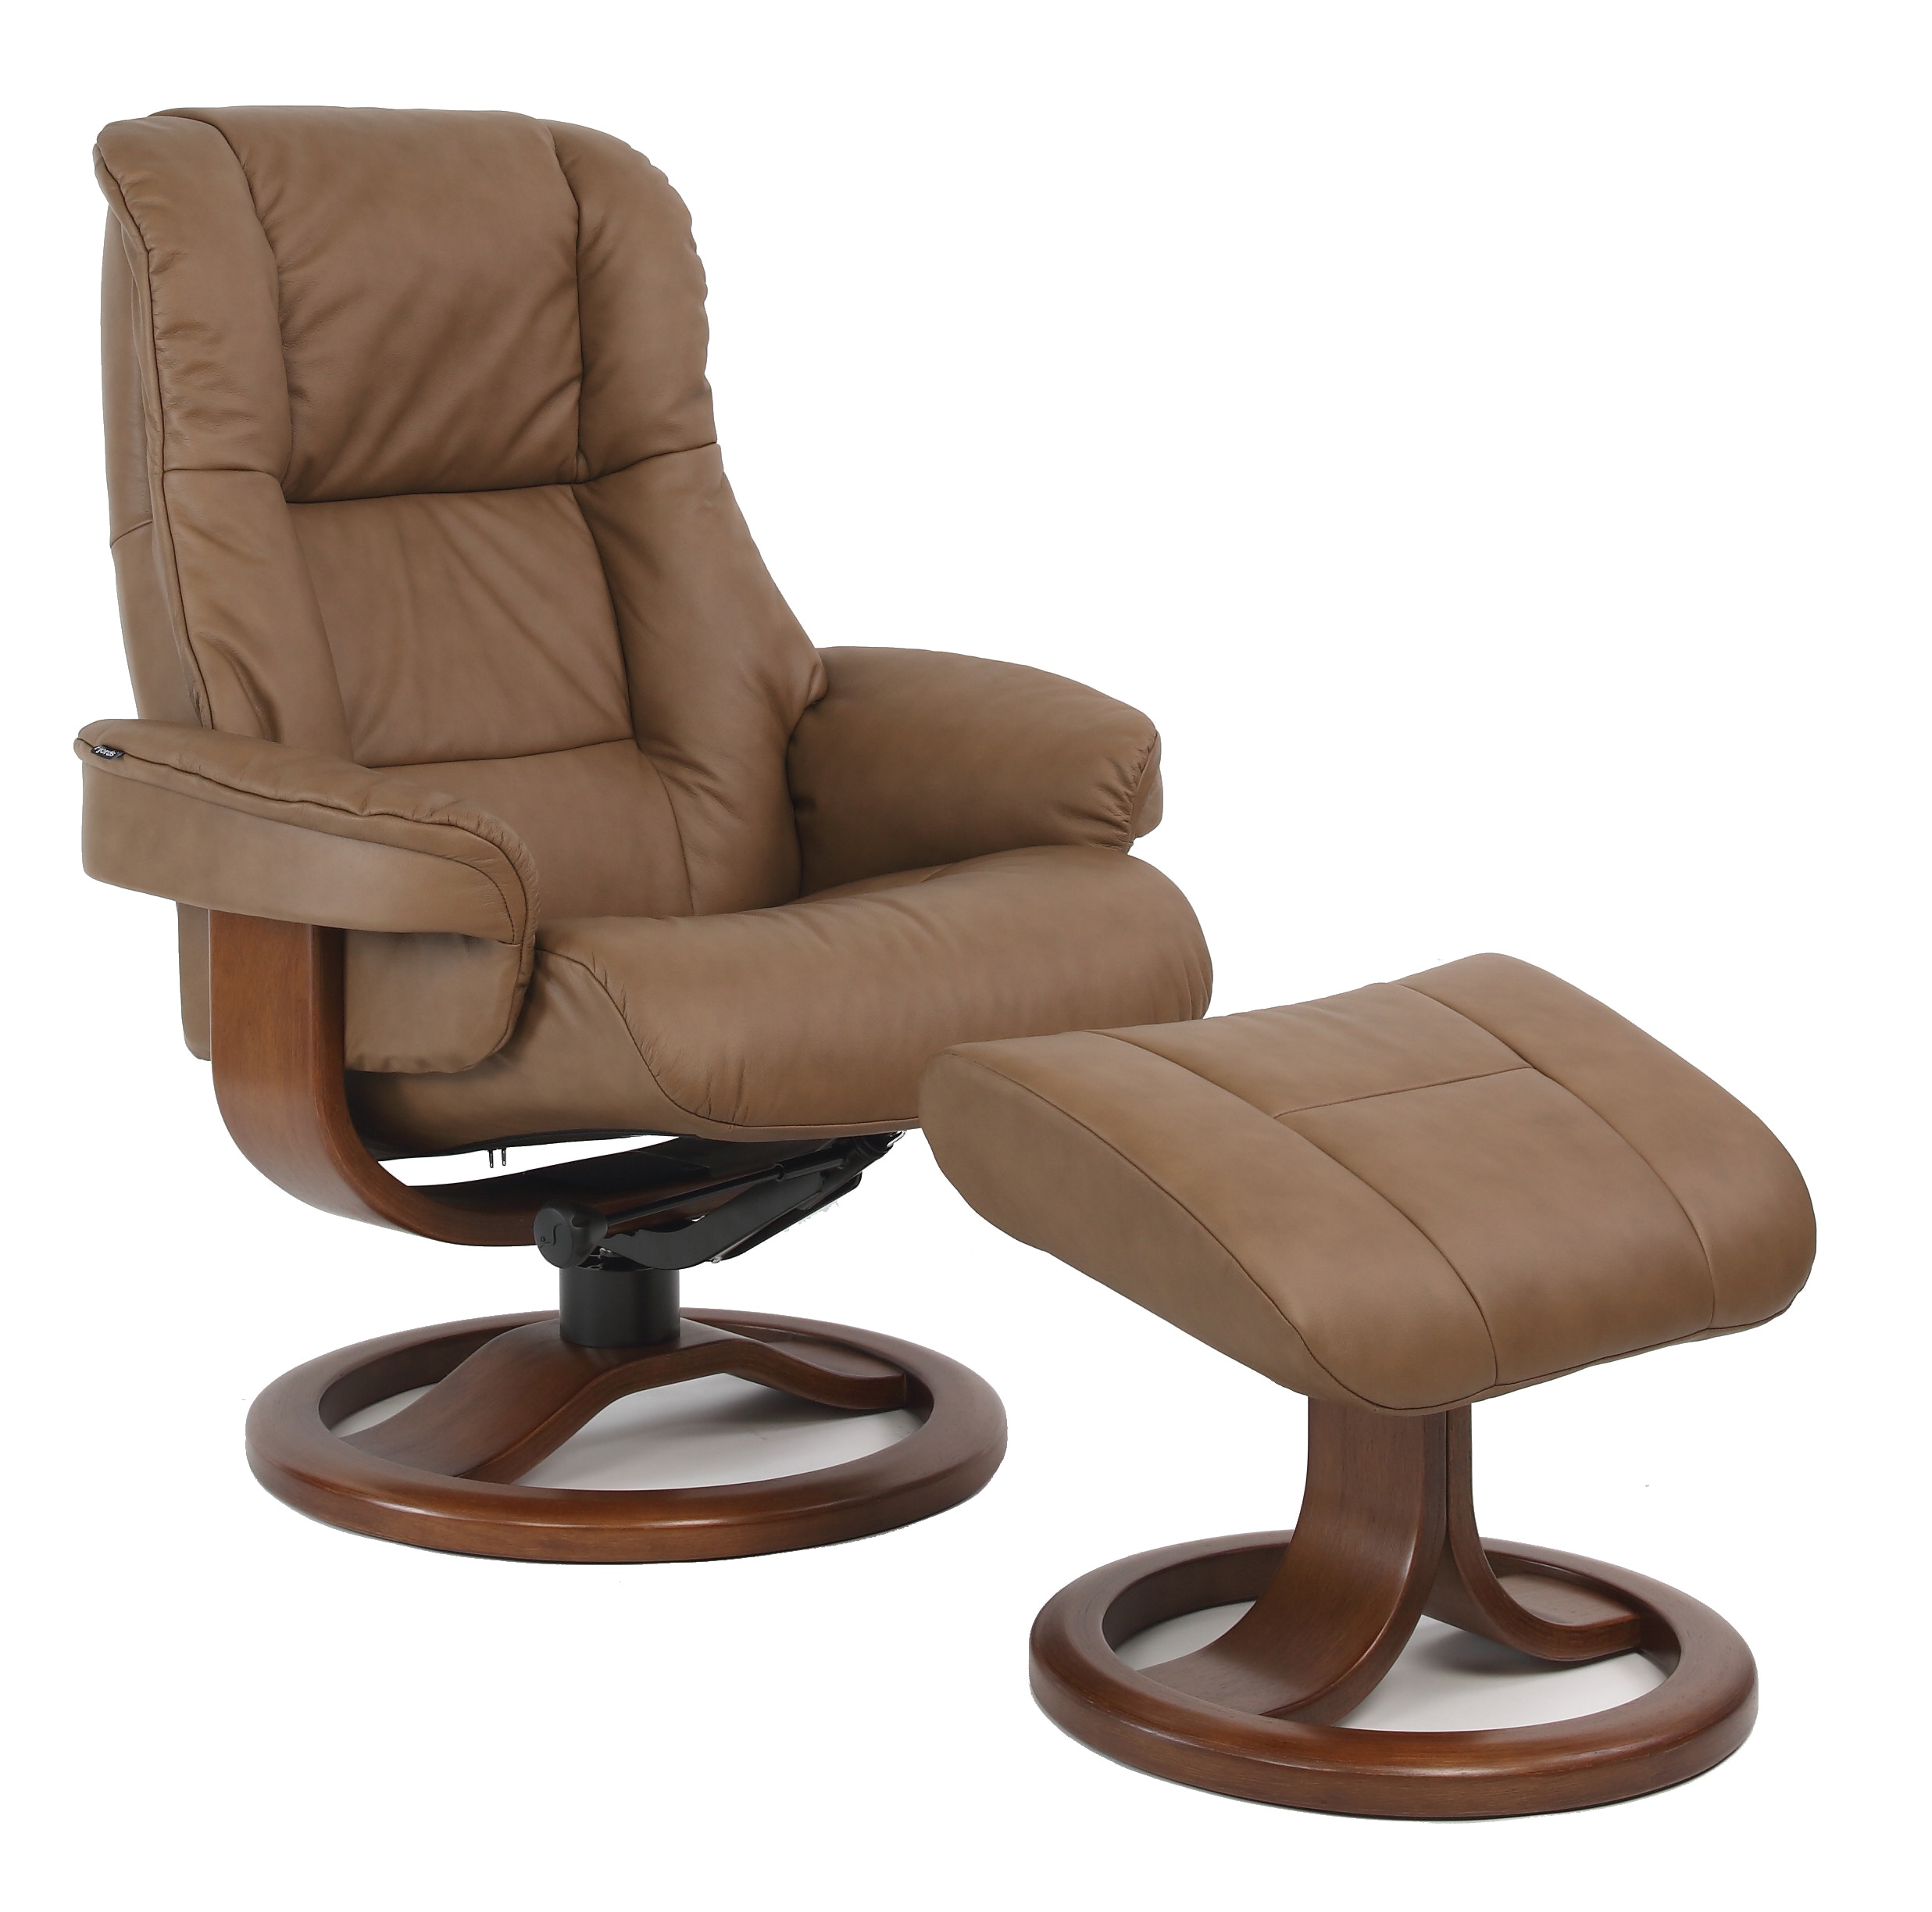 Loen R Large Recliner with Footstool Manual